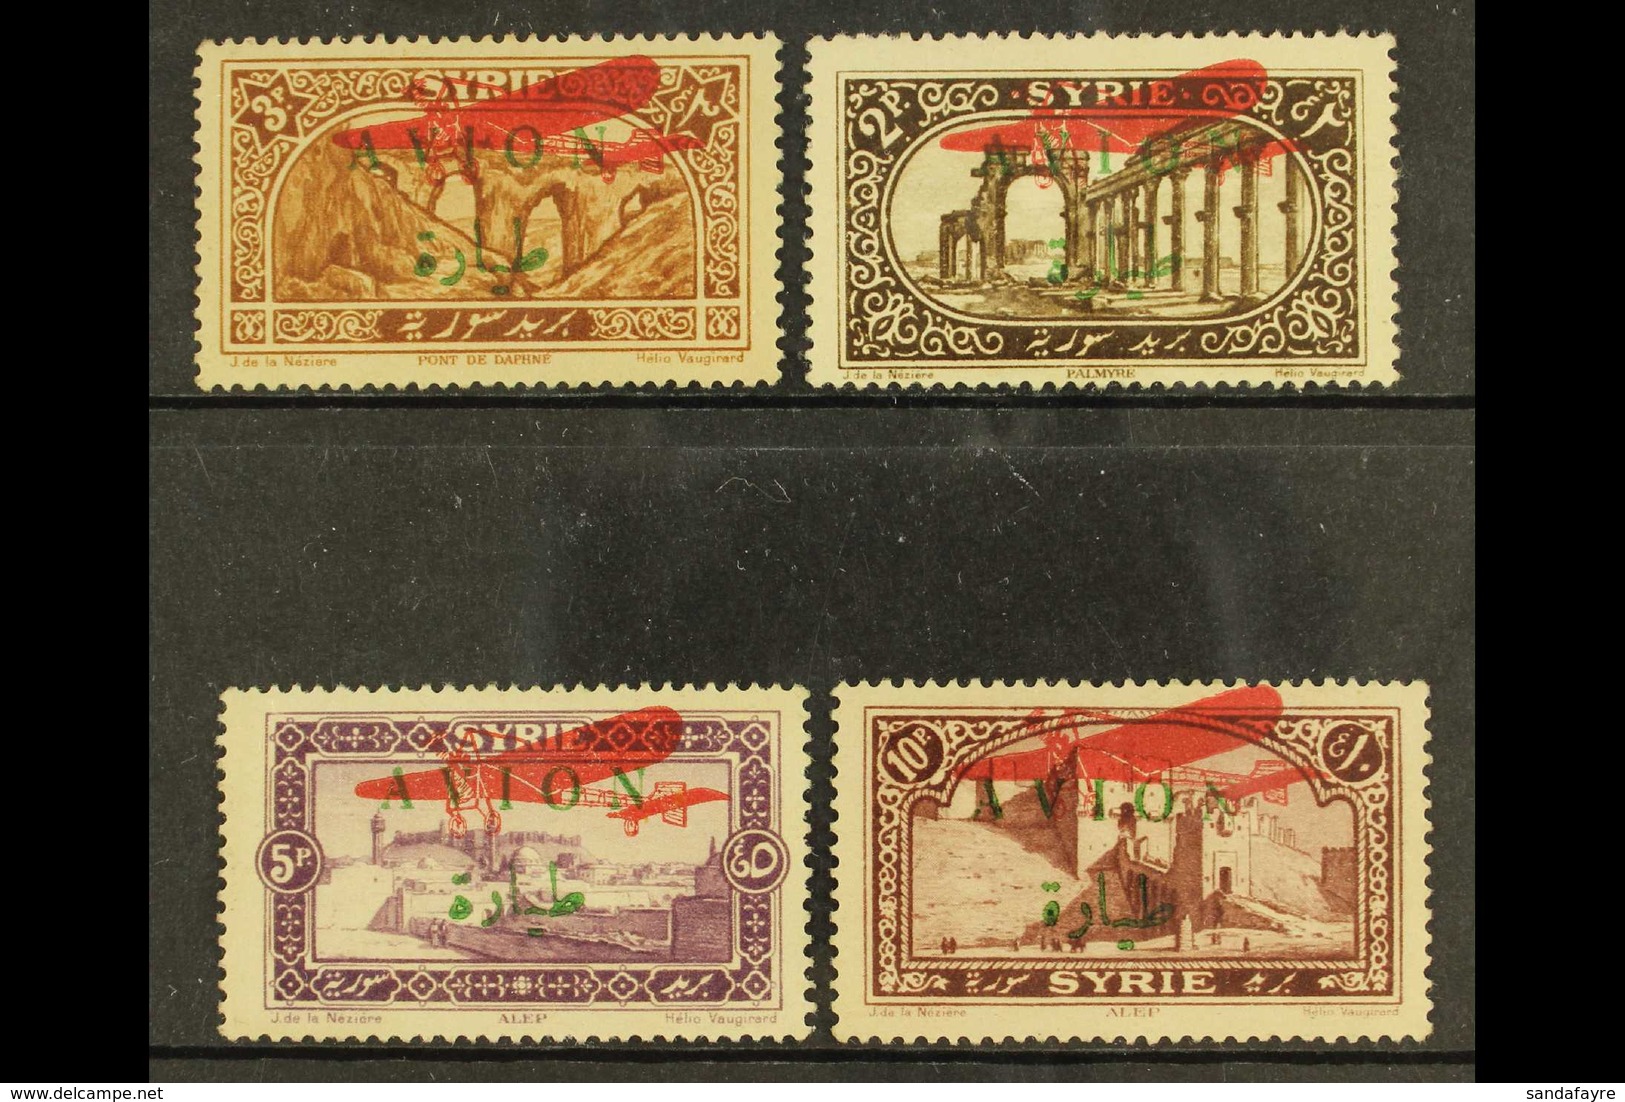 1925 AIRS WITH 1926 OVERPRINTS. 1925 Complete Set With "AVION" Opt In Green, With Additional 1926 Aeroplane Opt In Red,  - Syrie